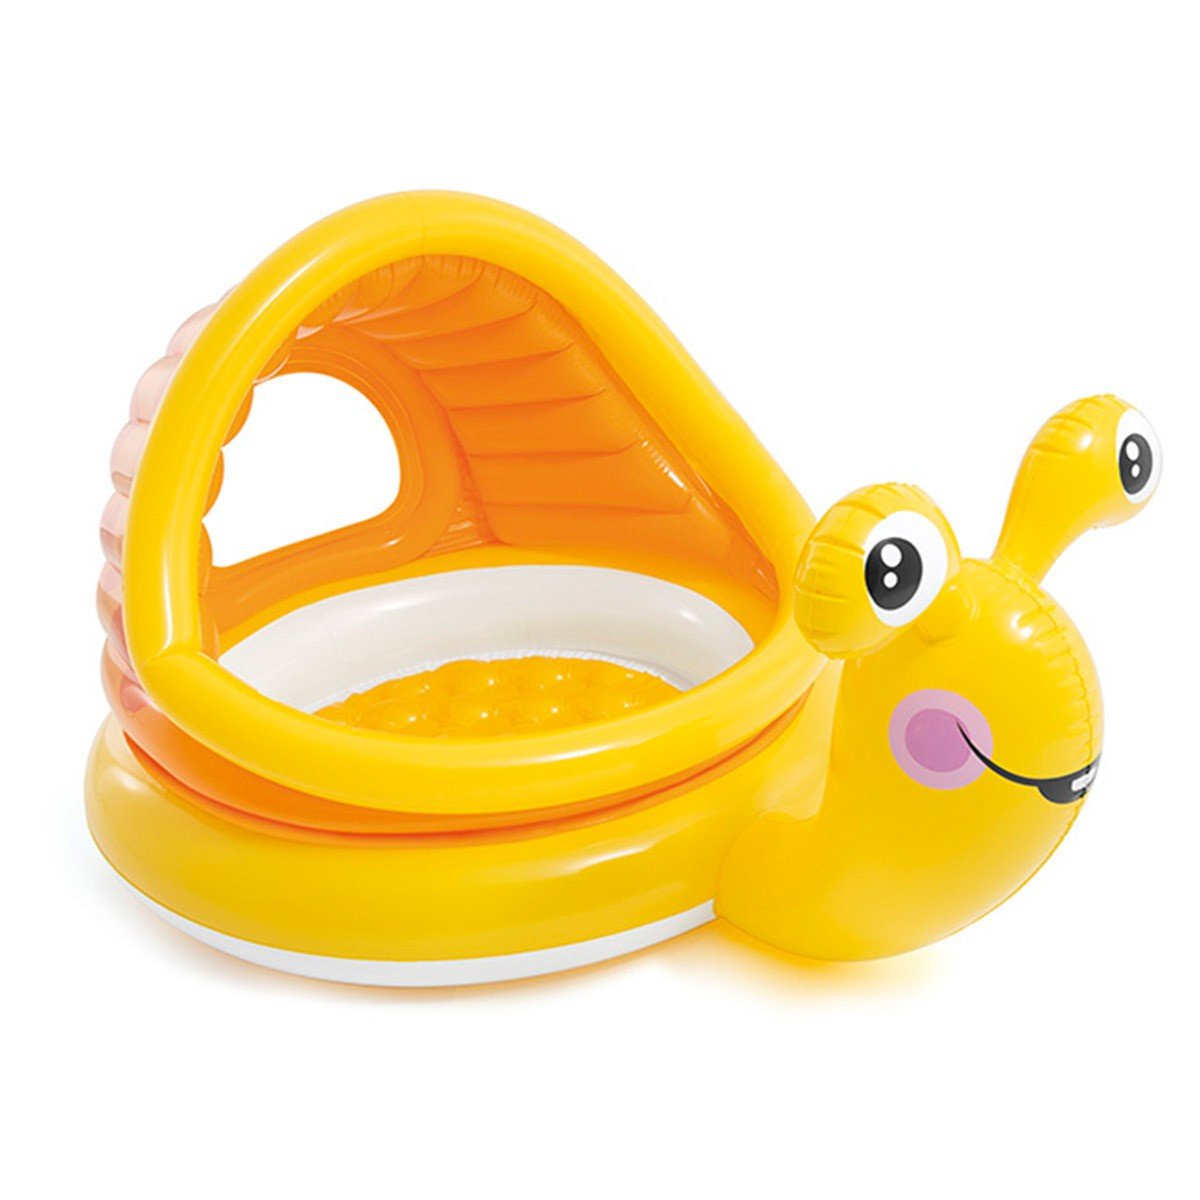 INTEX Snail Shade Baby Pool ( 57" x 40" x 29" ) - One Shop Online Toys in Pakistan